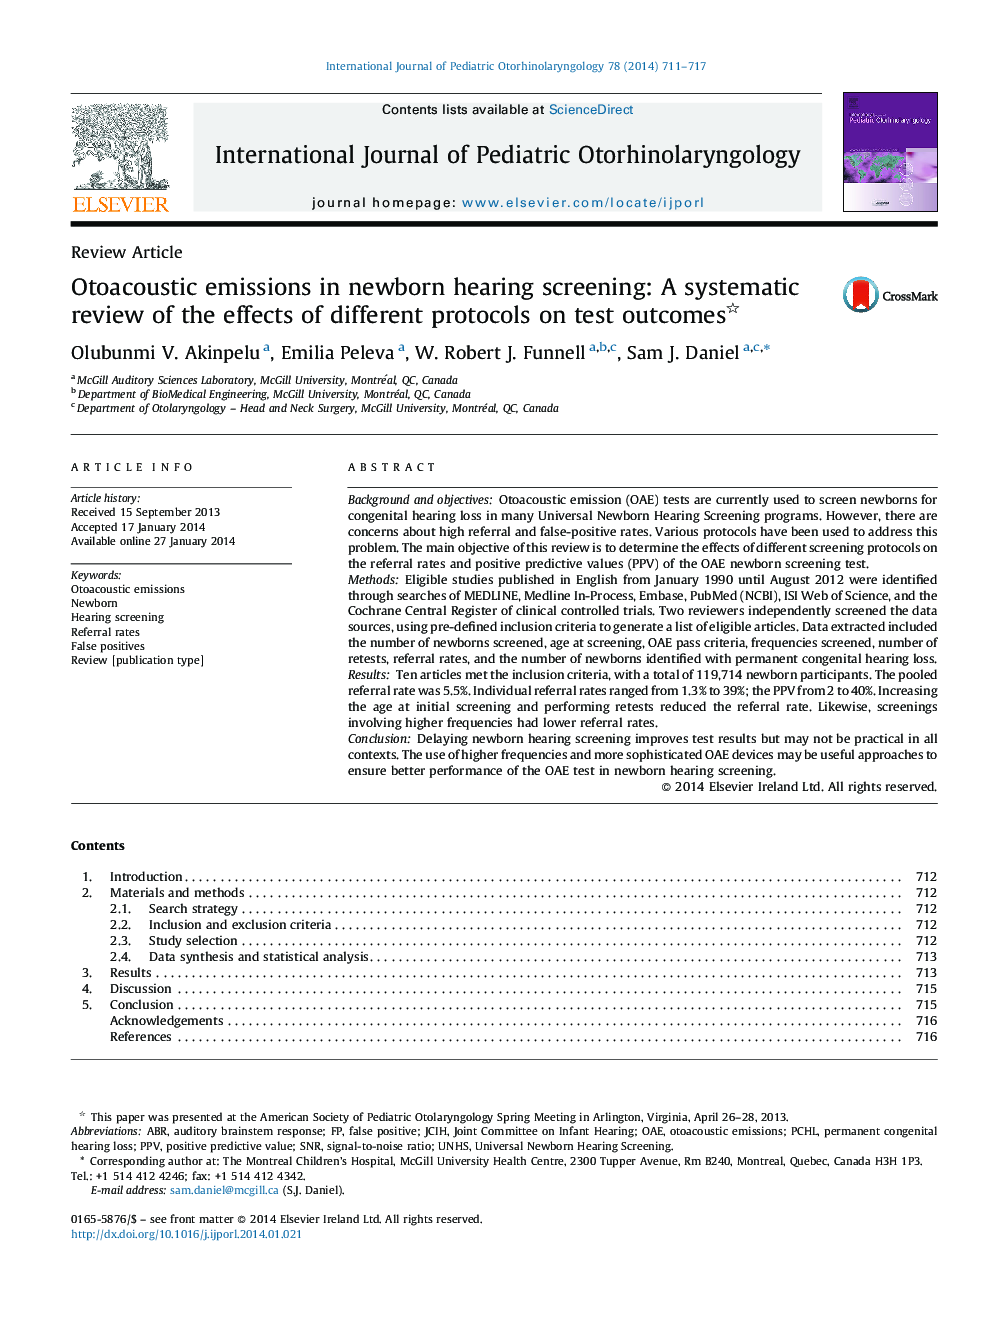 Otoacoustic emissions in newborn hearing screening: A systematic review of the effects of different protocols on test outcomes 